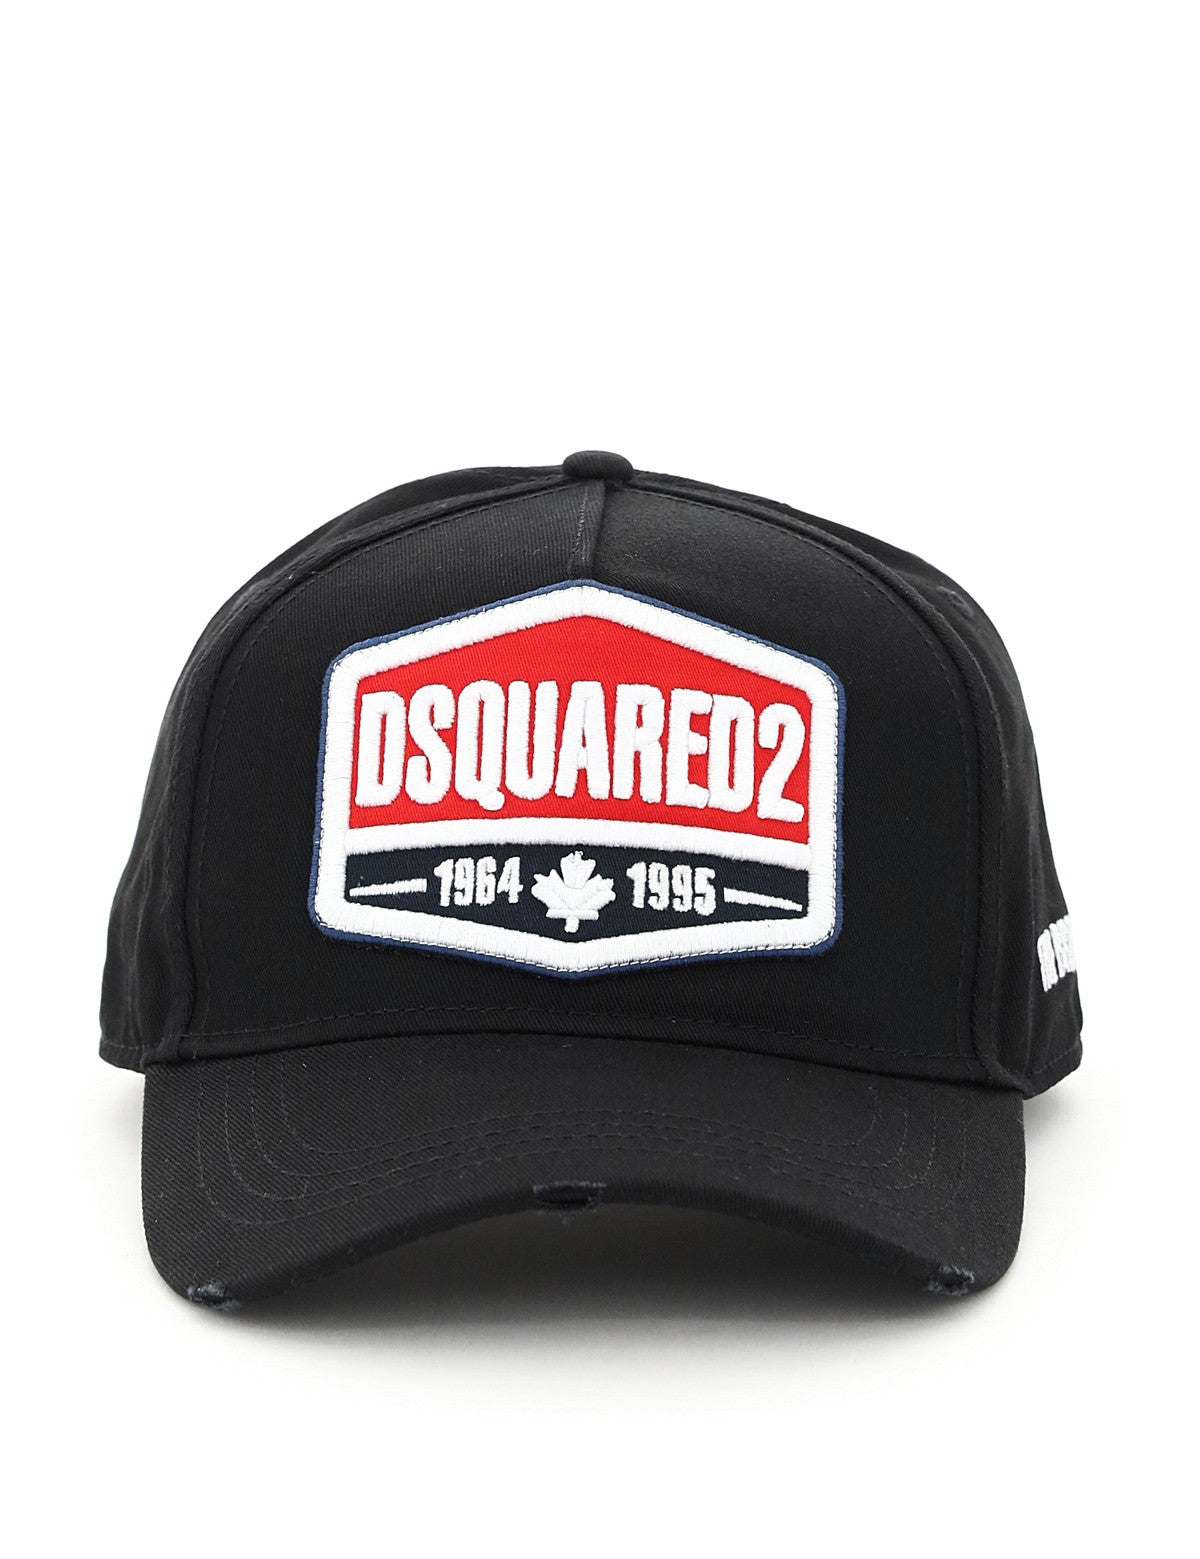 dsquared2-baseball-cap-with-embroidered-patch_15f019c9-4207-4d3e-b219-b823d97d8e83.jpg